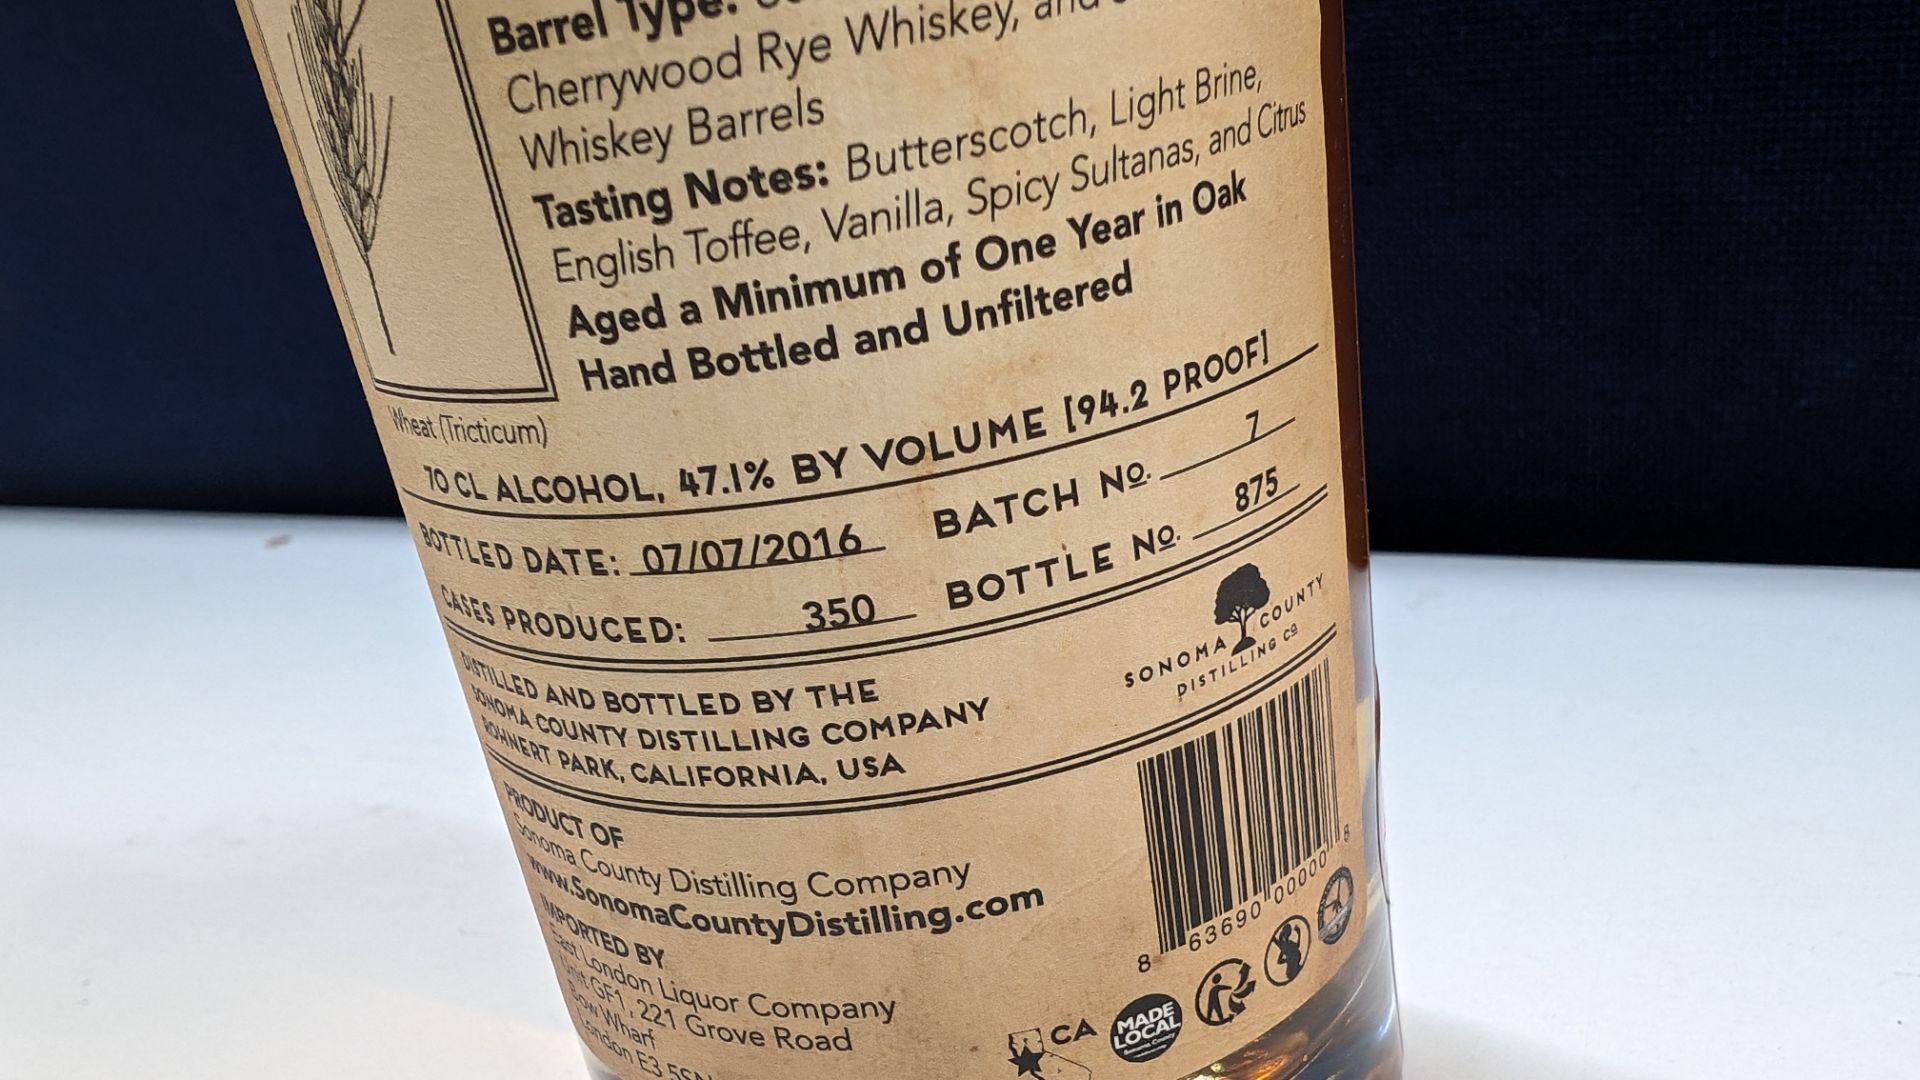 1 off 700ml bottle of Sonoma County 2nd Chance Wheat Double Alembic Pot Distilled Whiskey. 47.1% al - Image 5 of 6